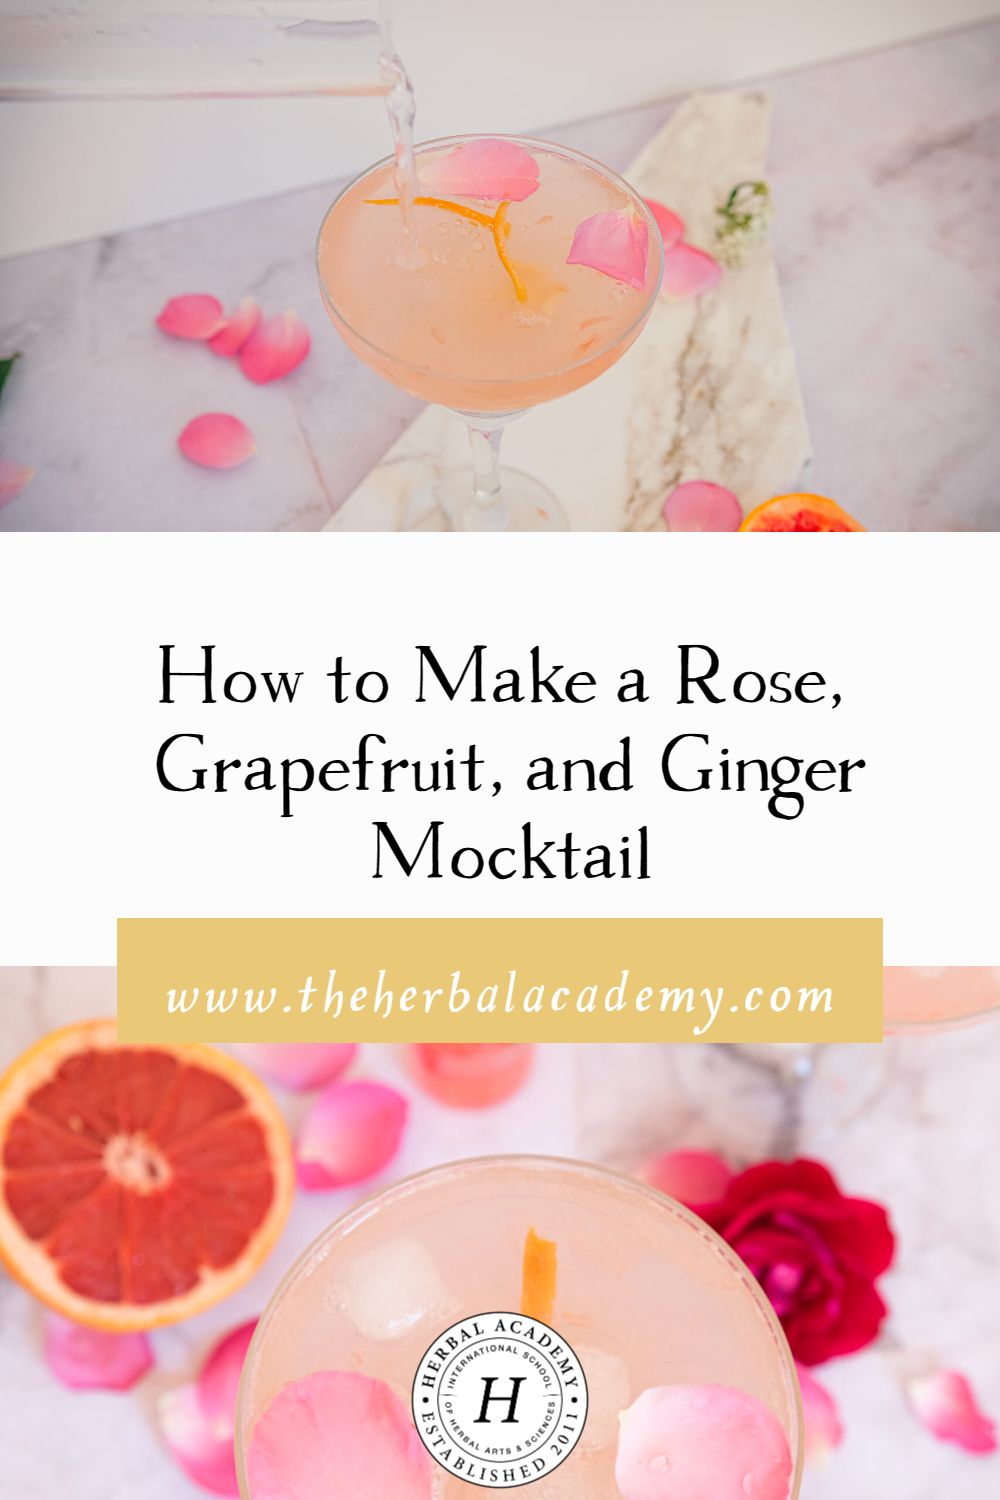 How to Make a Rose, Grapefruit, and Ginger Mocktail | Herbal Academy | Savor the irresistible aroma of this Rose, Grapefuit, and Ginger Mocktail balanced with a touch of bitter for optimal digestion.